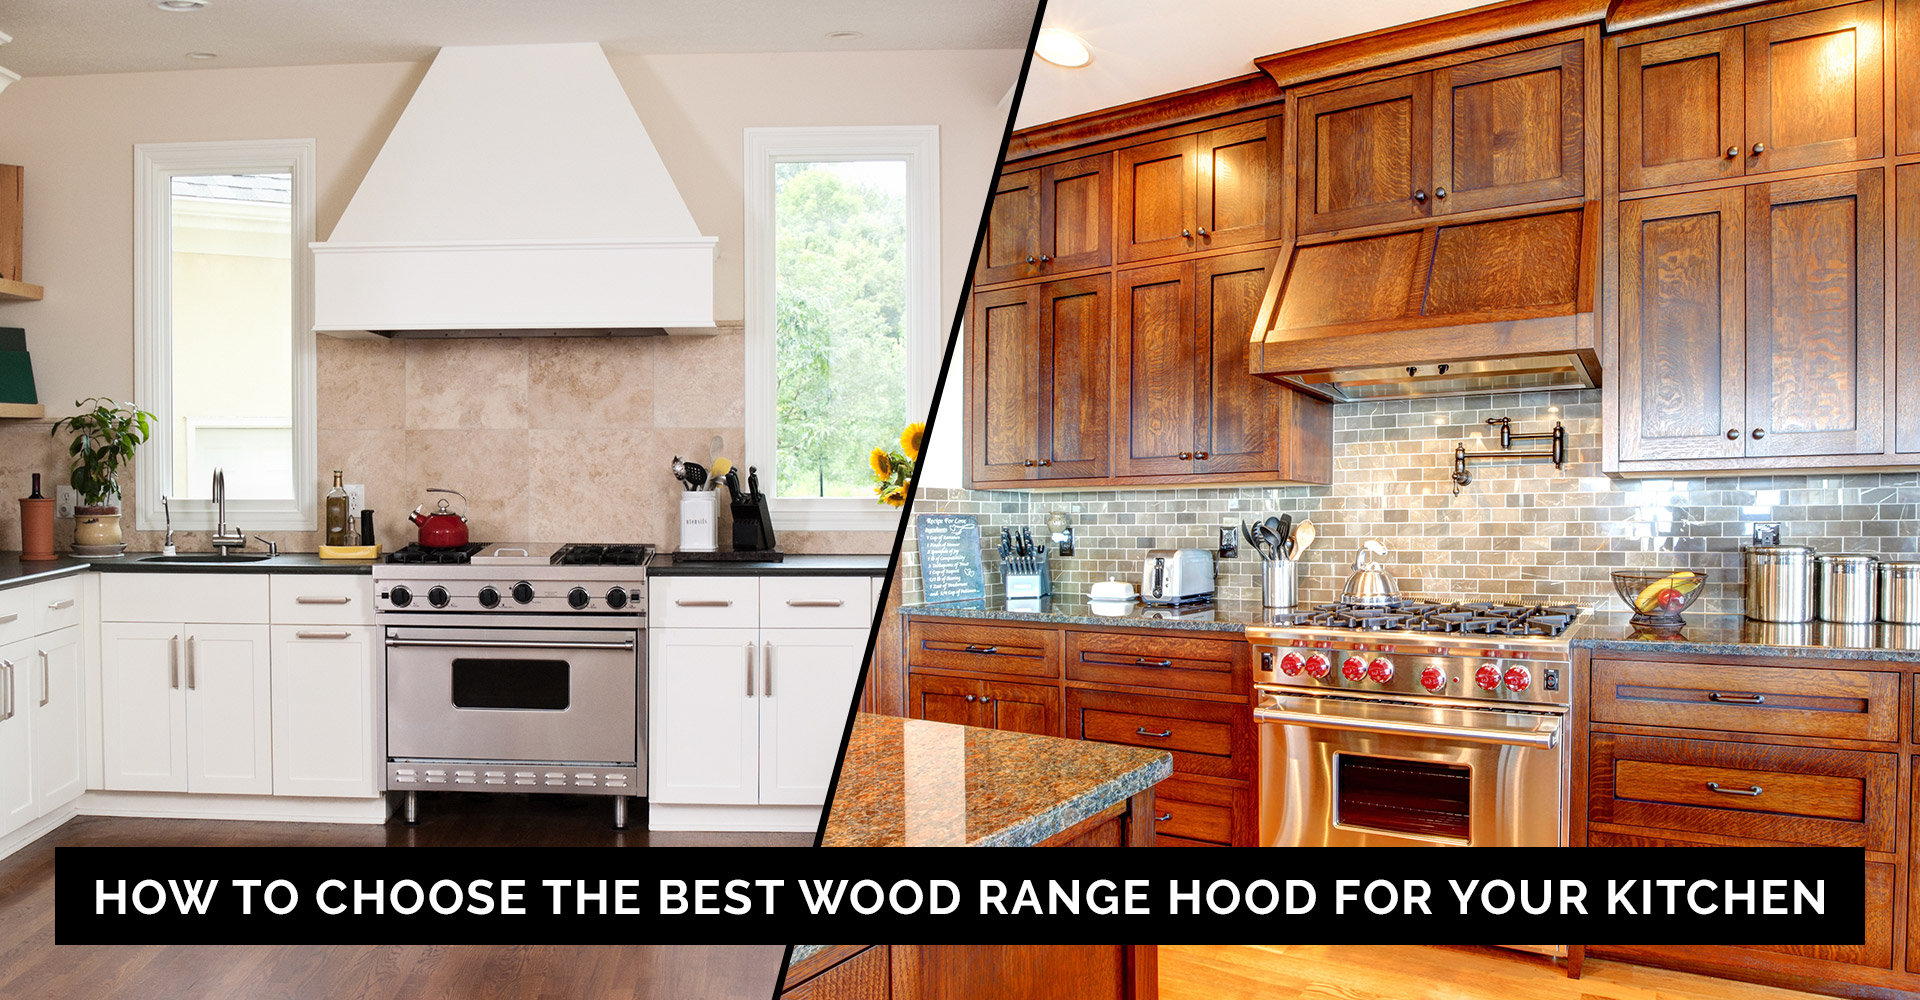 How to Choose the Best Wood Range Hood for Your Kitchen